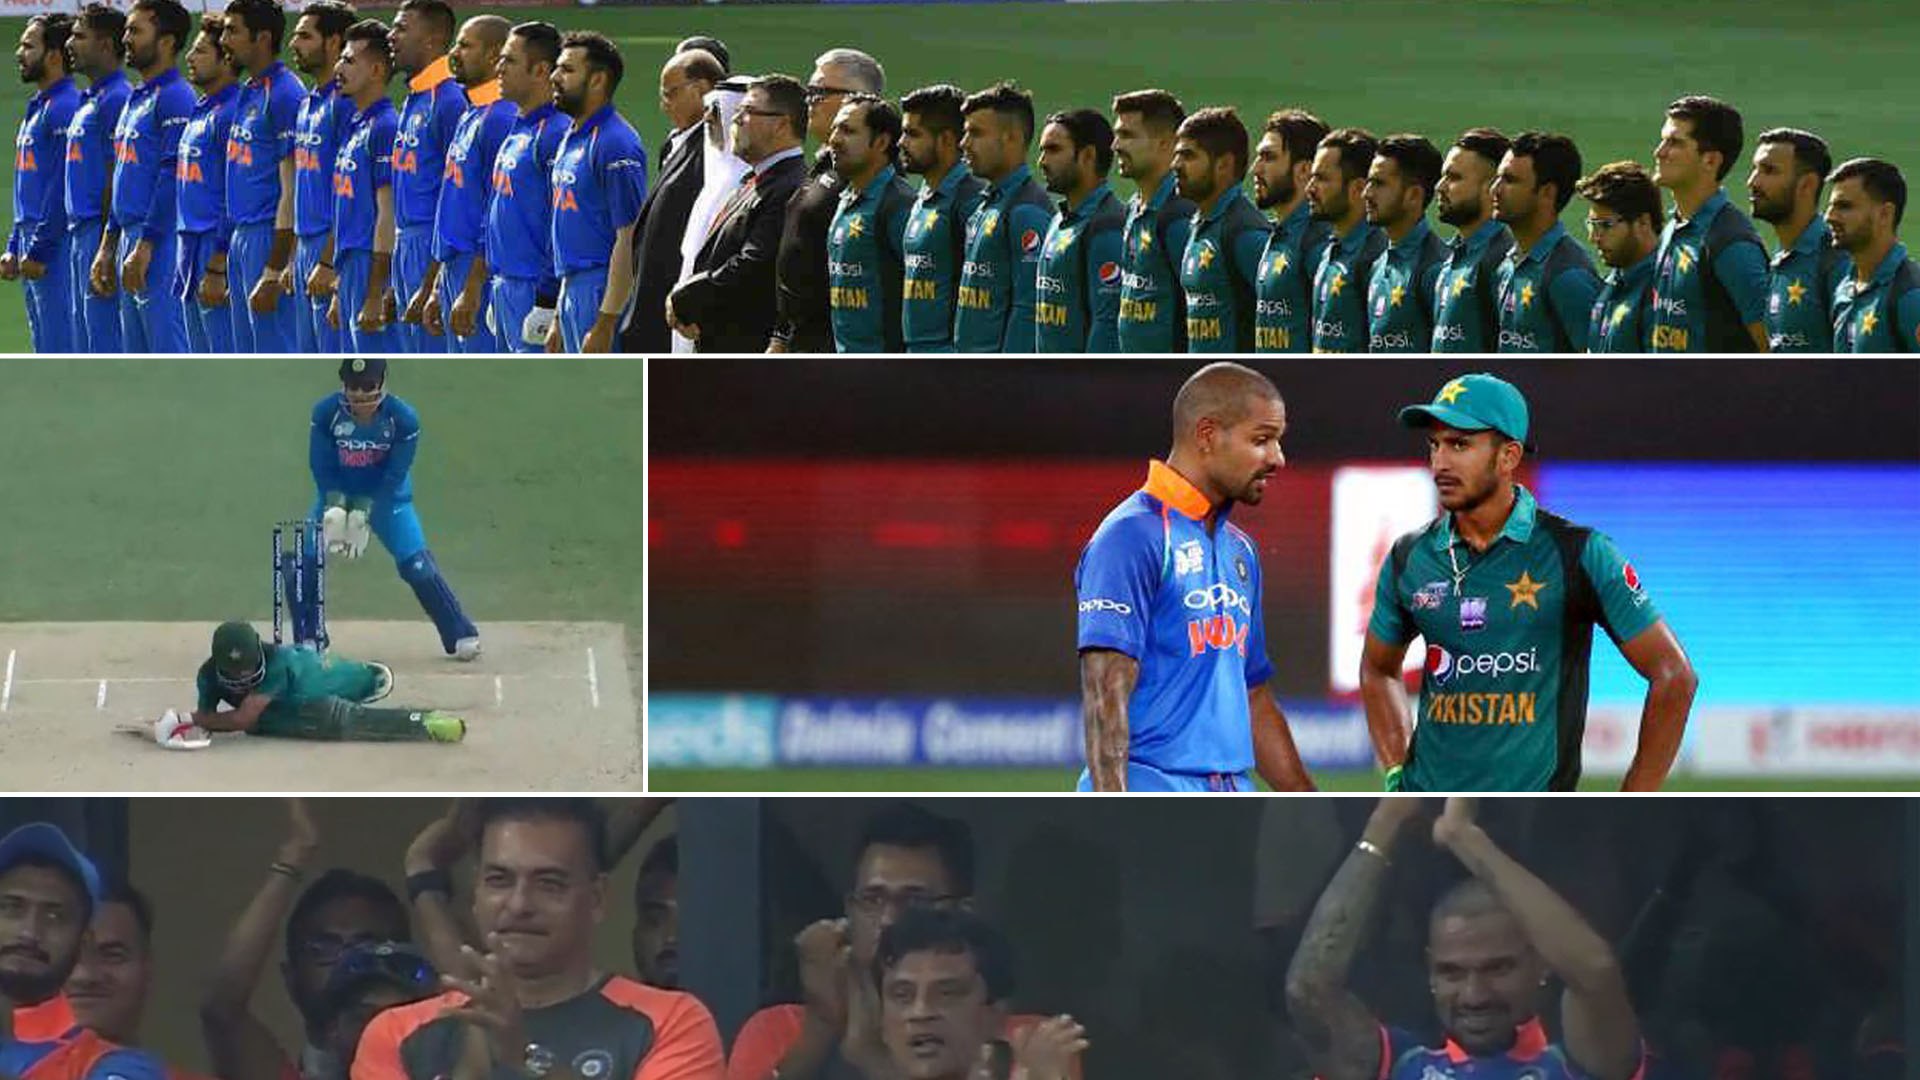 Asia cup 2018:Ind vs Pak | India Wins By 9 wickets